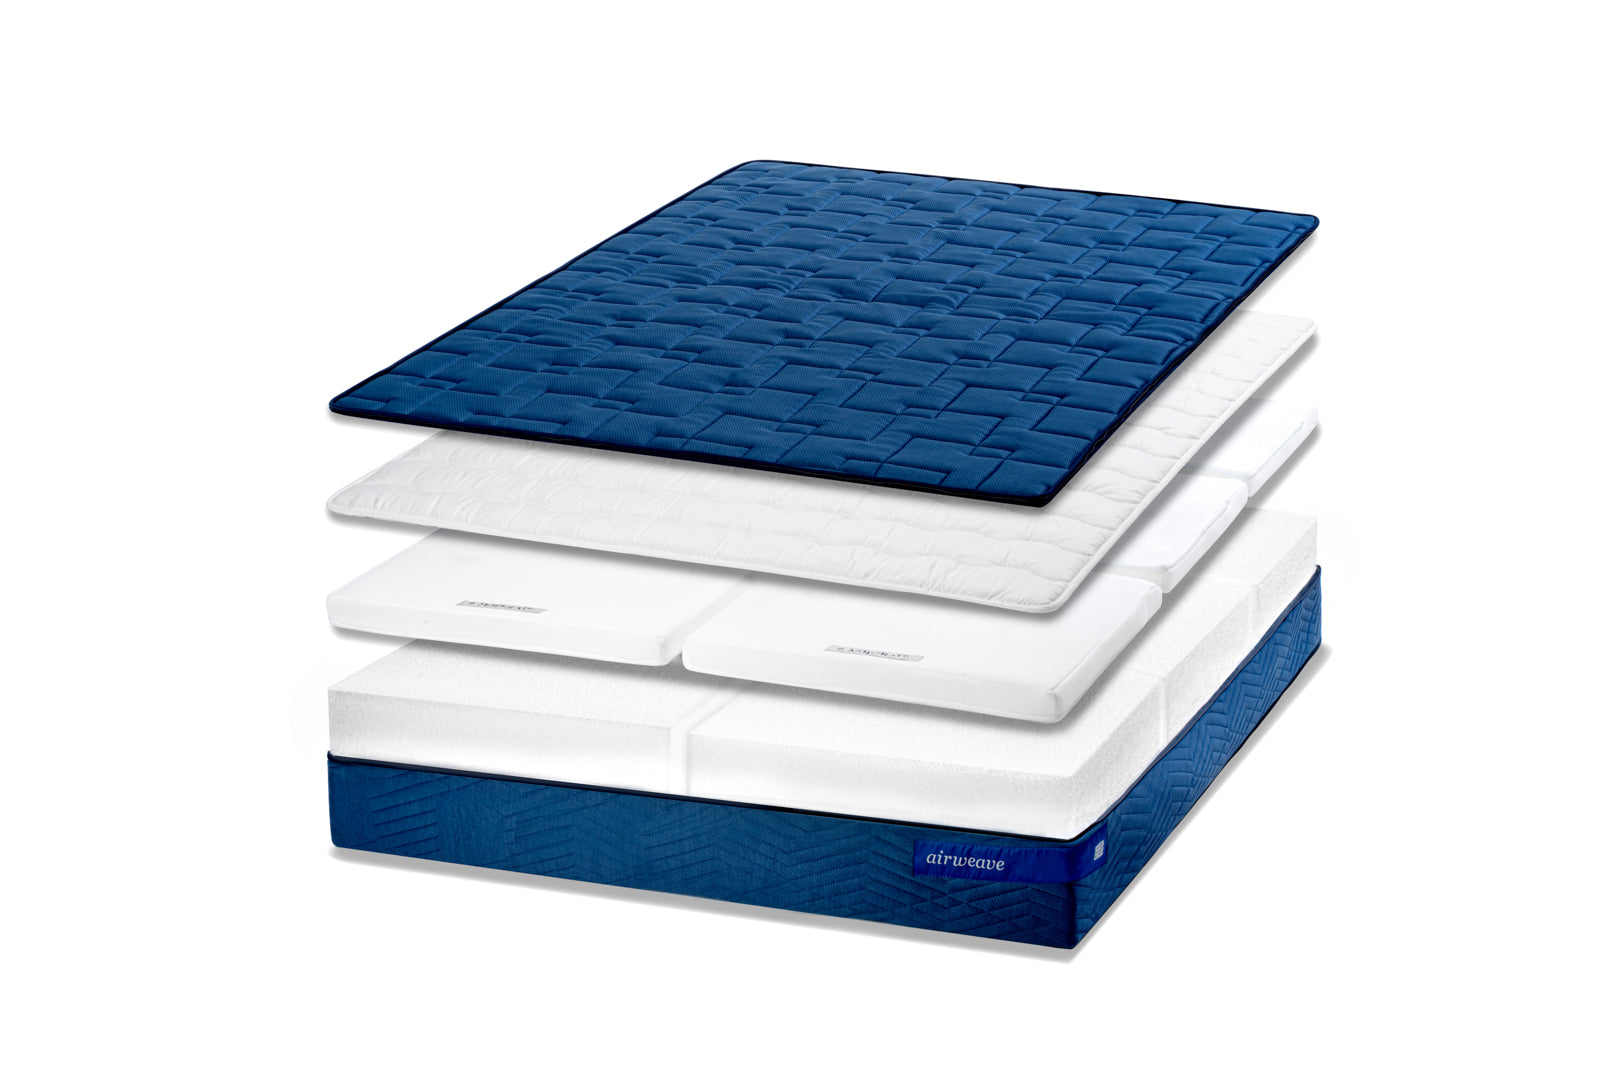 Save up to $1050 on airweave mattresses this Black Friday